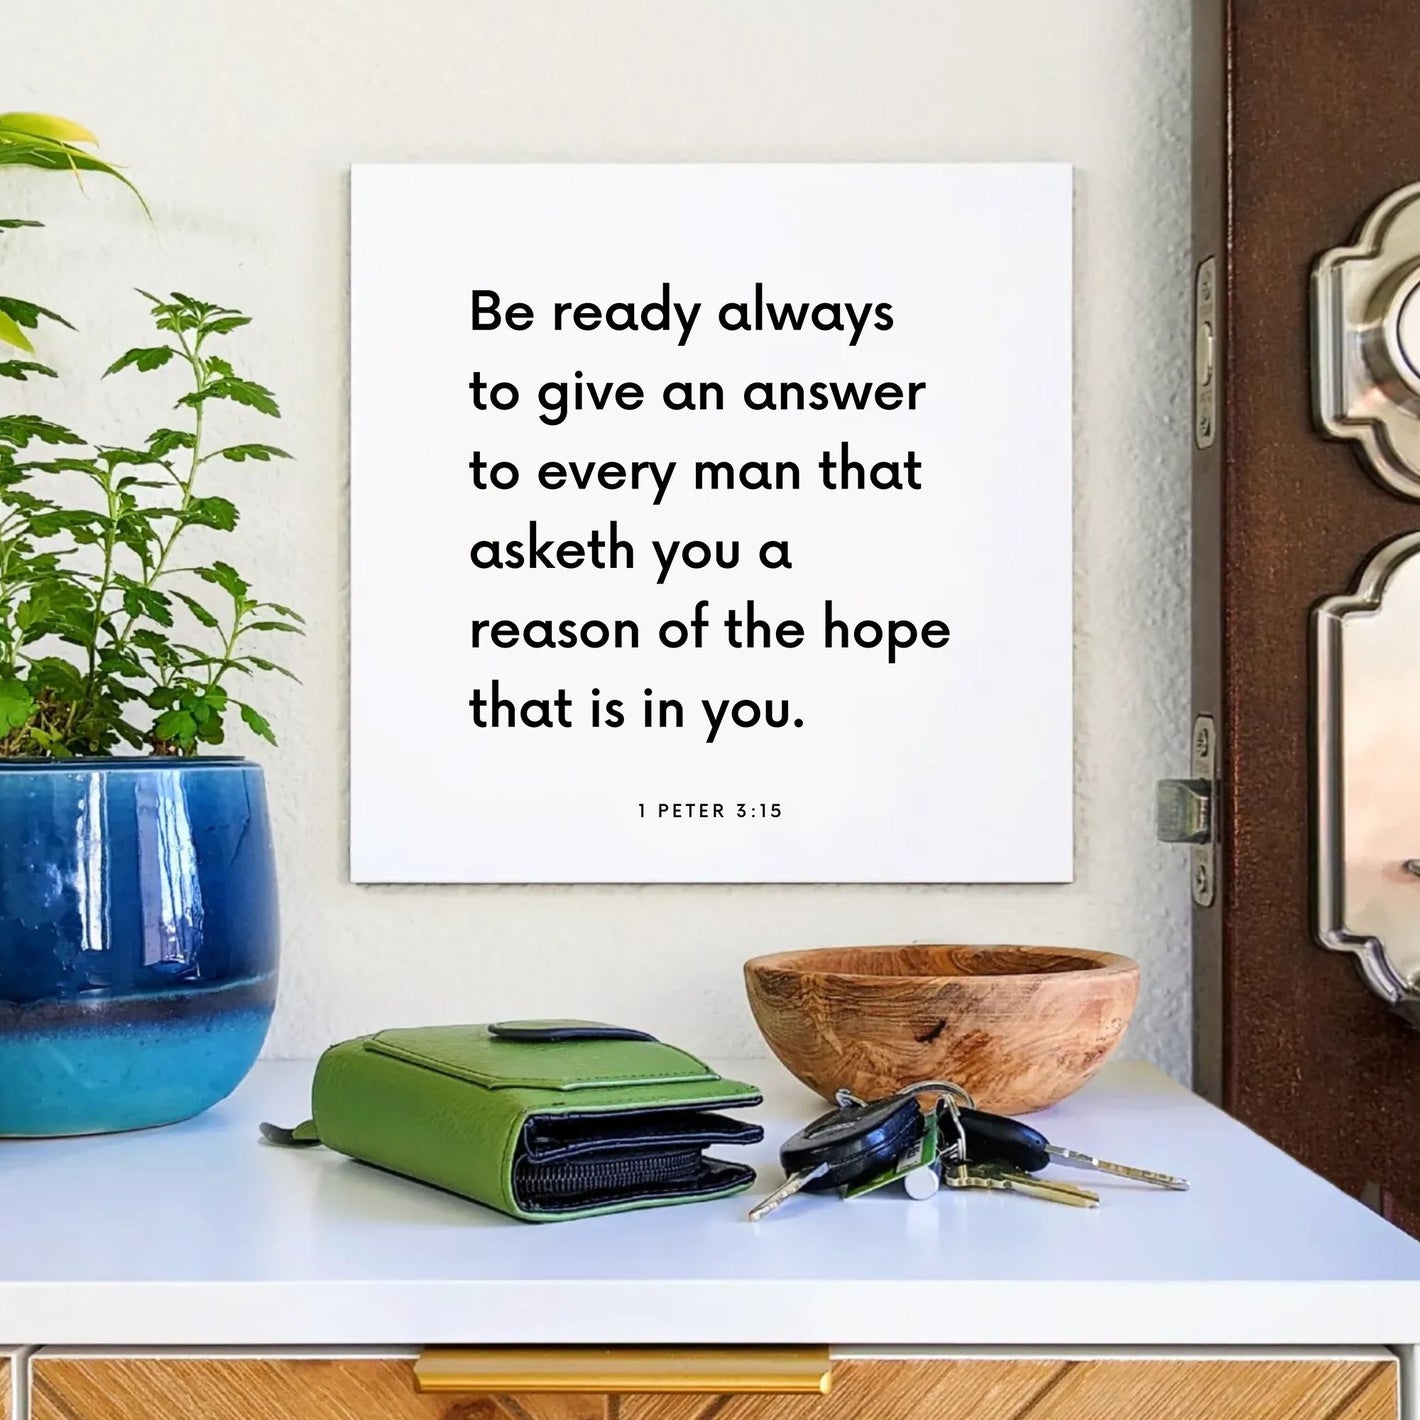 Entryway mouting of the scripture tile for 1 Peter 3:15 - "Be ready always to give an answer to every man that asketh"